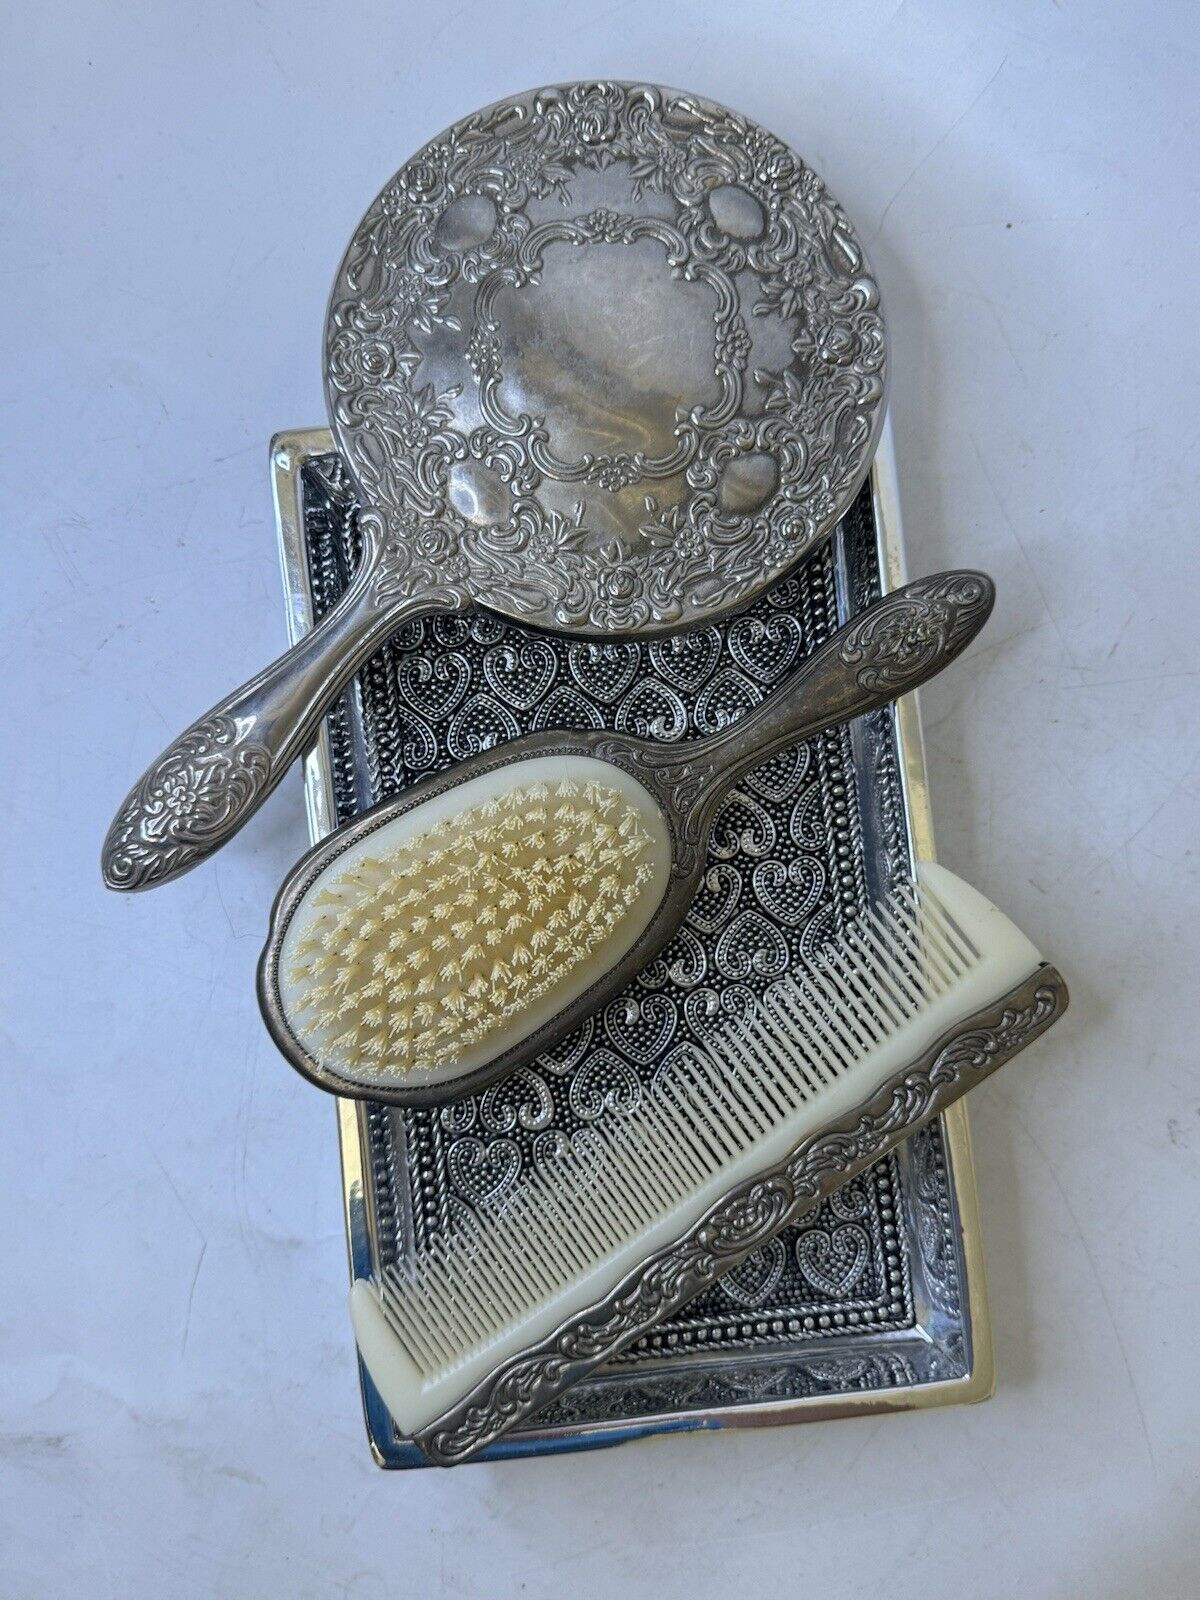 VTG Antique Silver Plated Ornate Vanity Set Mirror, Brush, Comb, Tray